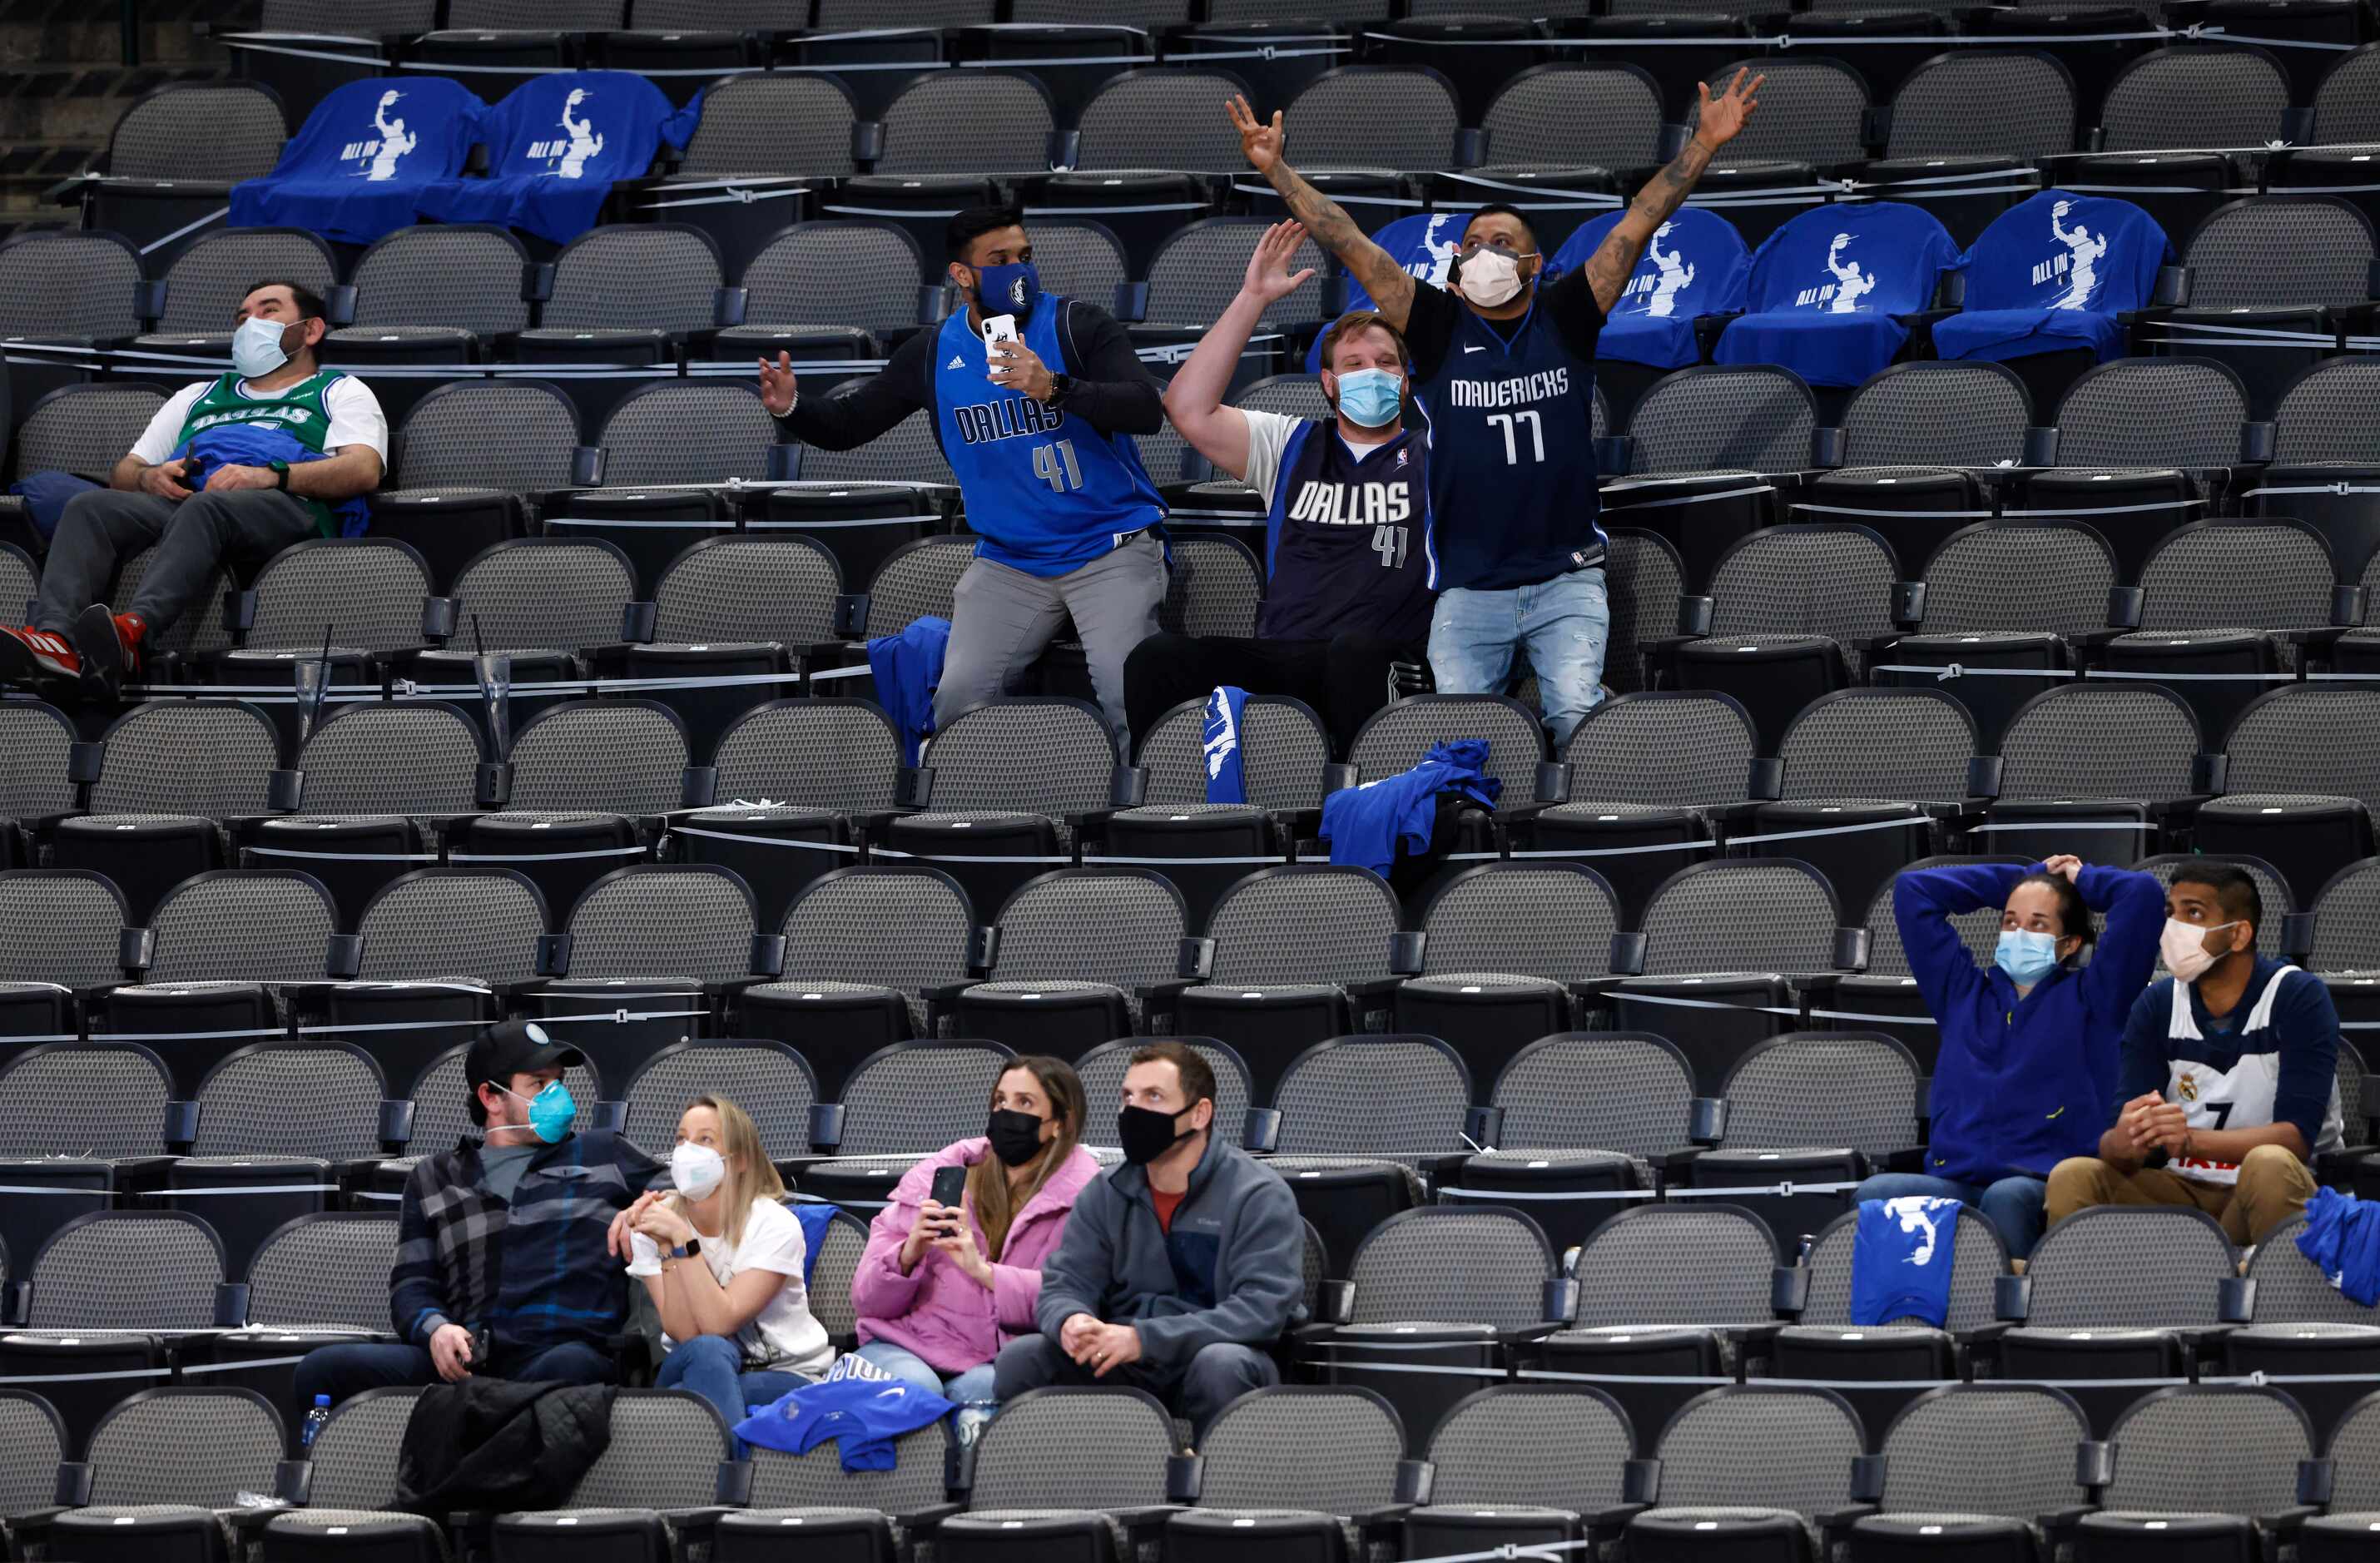 Dallas Mavericks fans celebrate as they are shown on the big screen in a game against the...